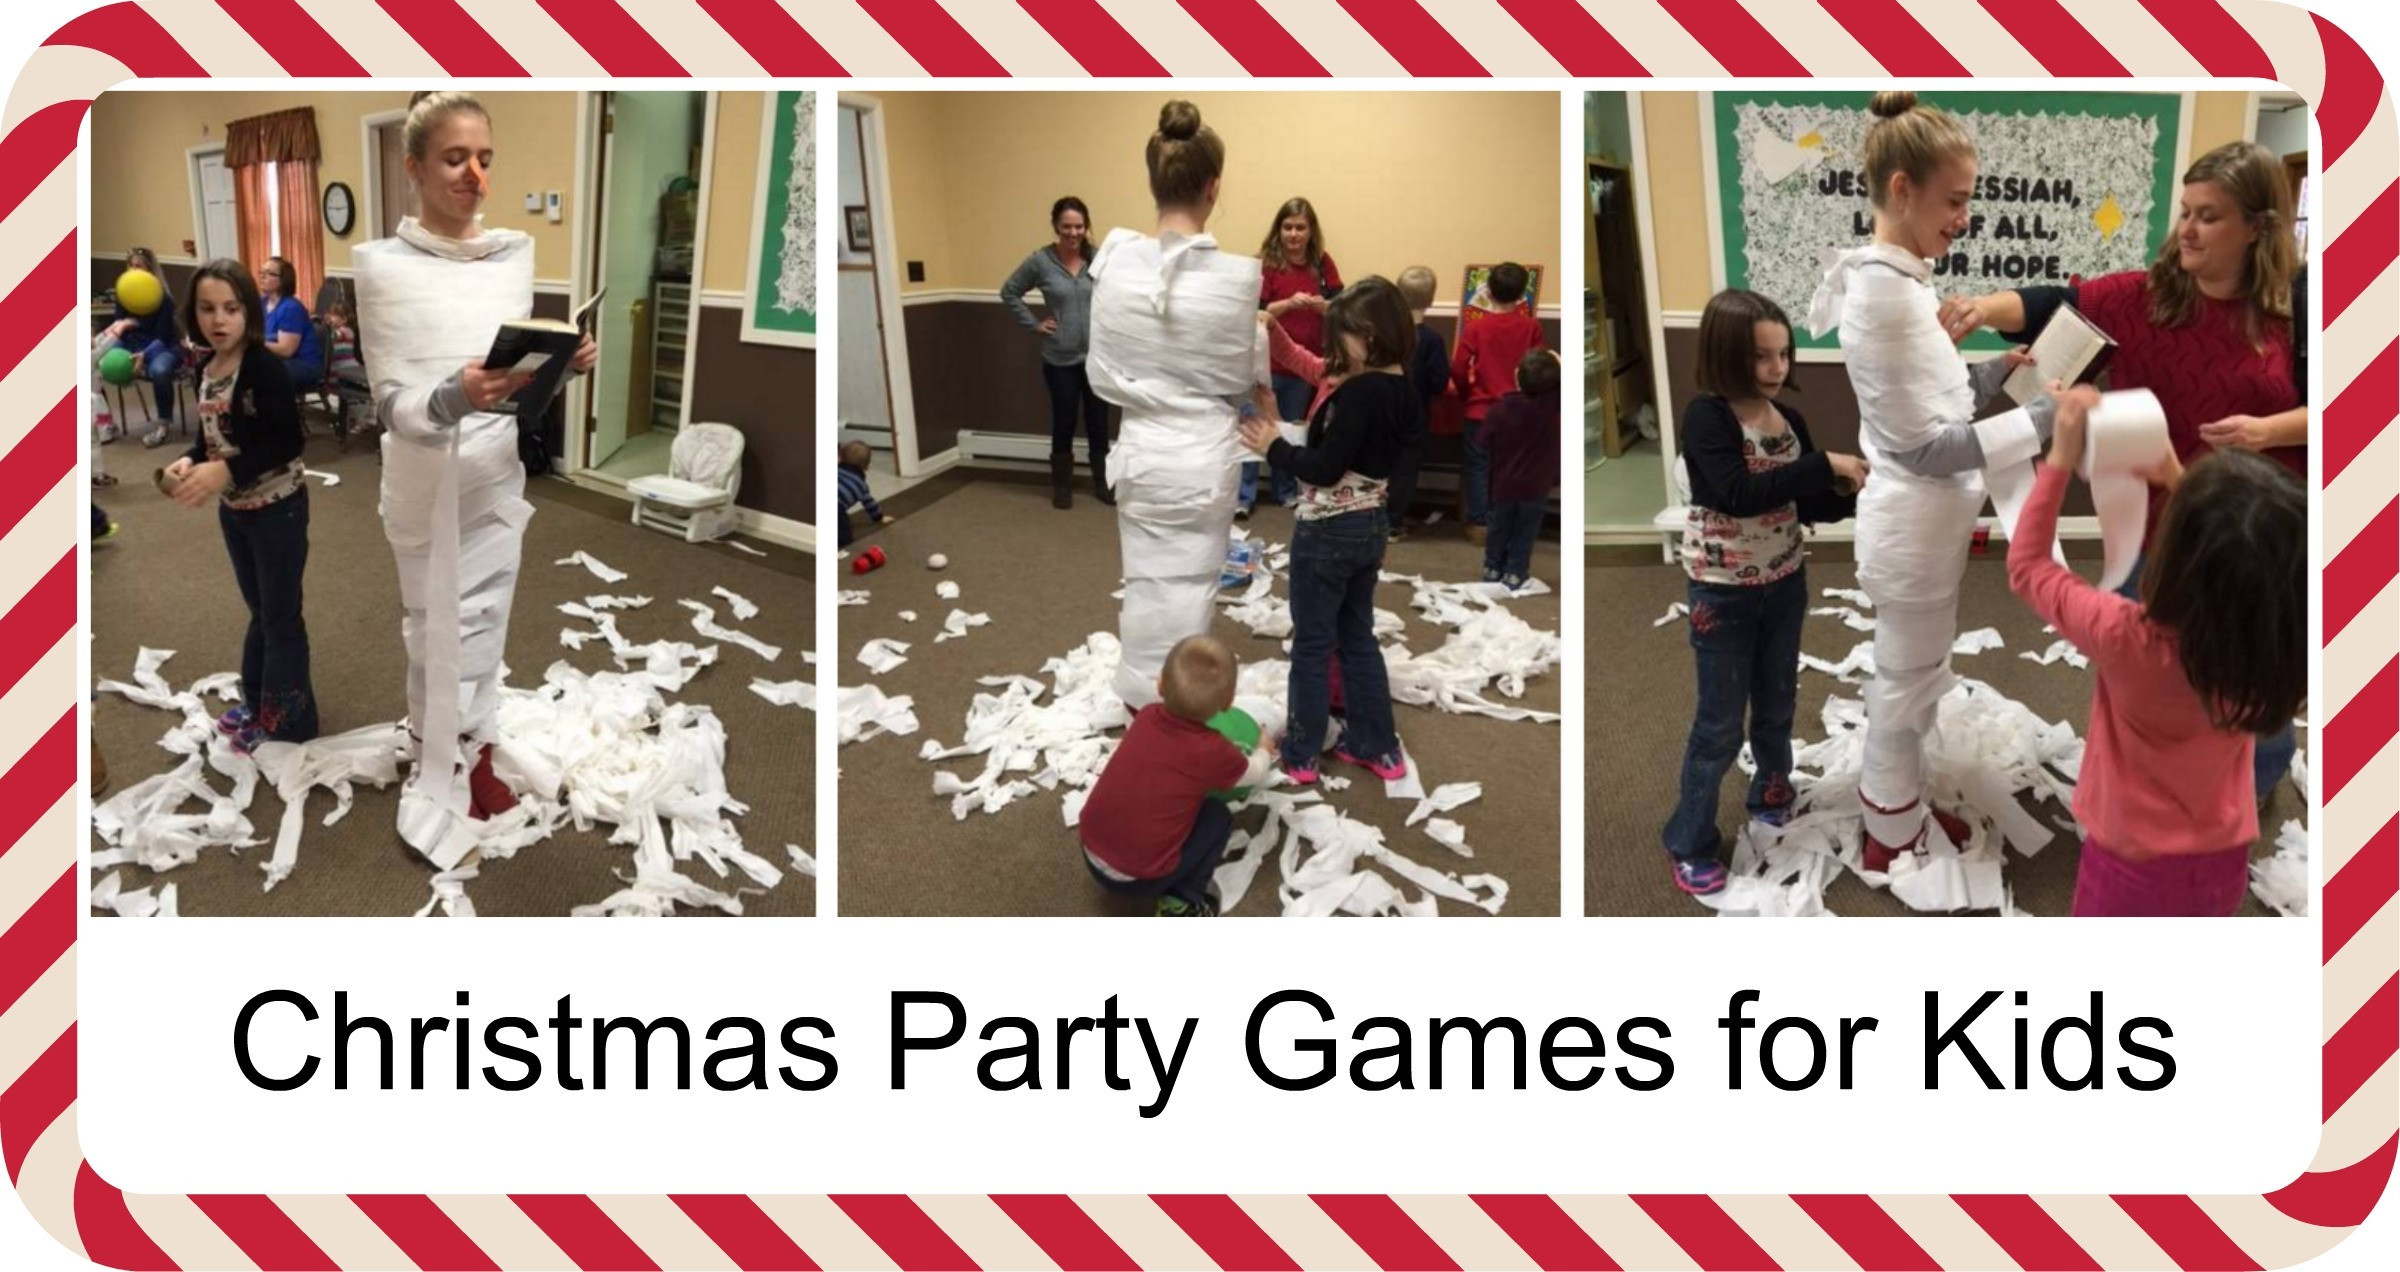 Christmas Party Game Ideas For Kids
 Cool Christmas Games